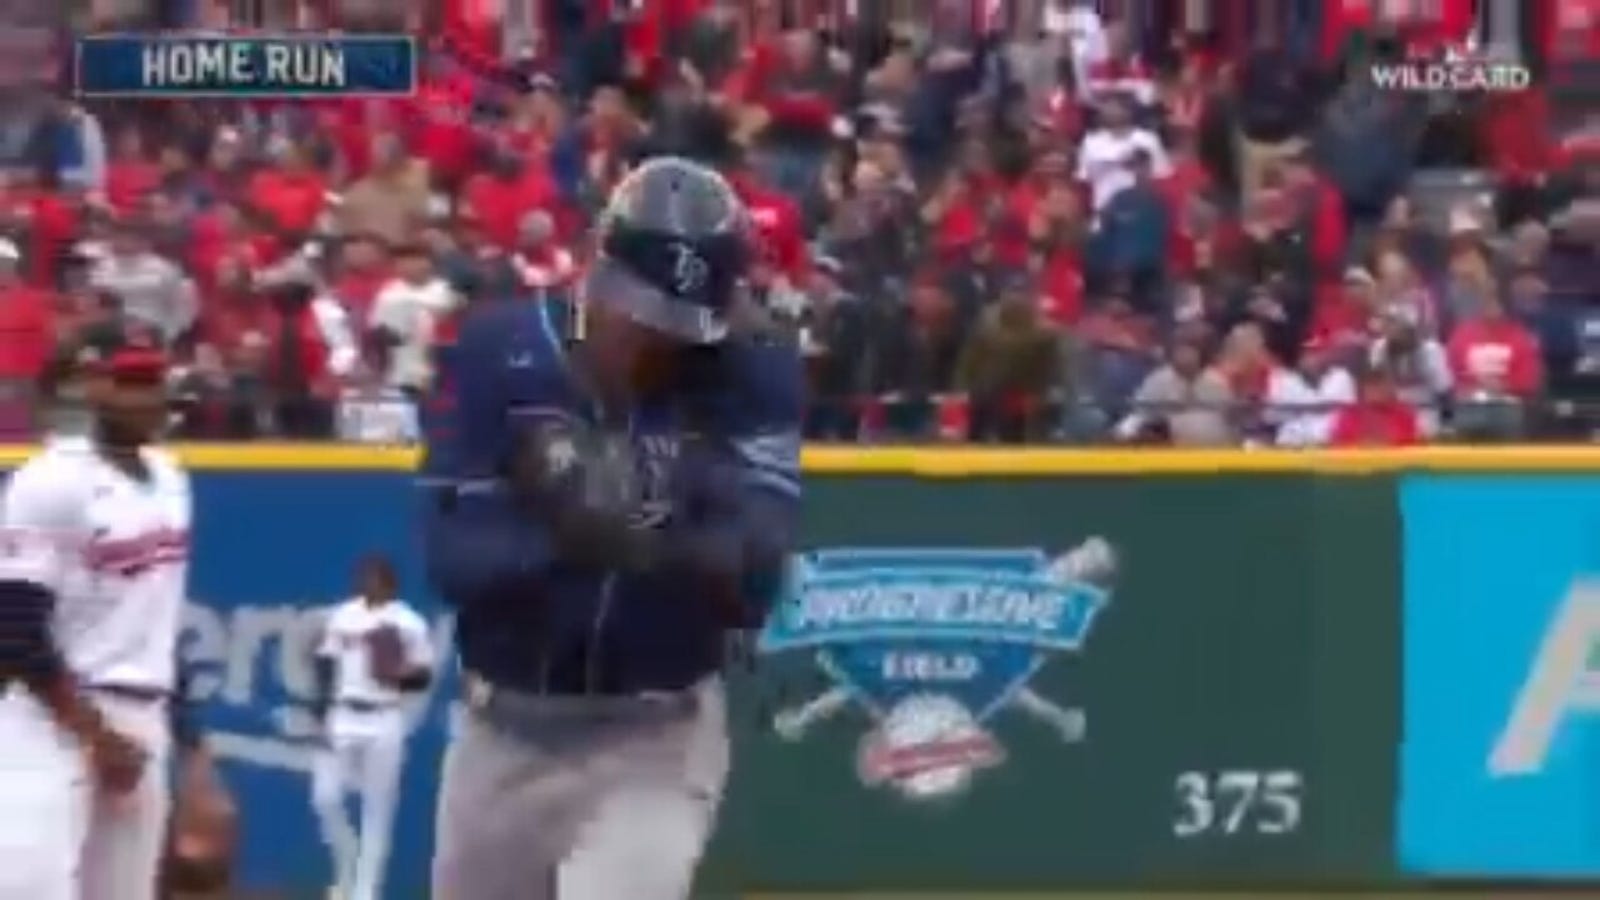 Jose Siri's home run gives the Rays a 1-0 lead vs the Guardians